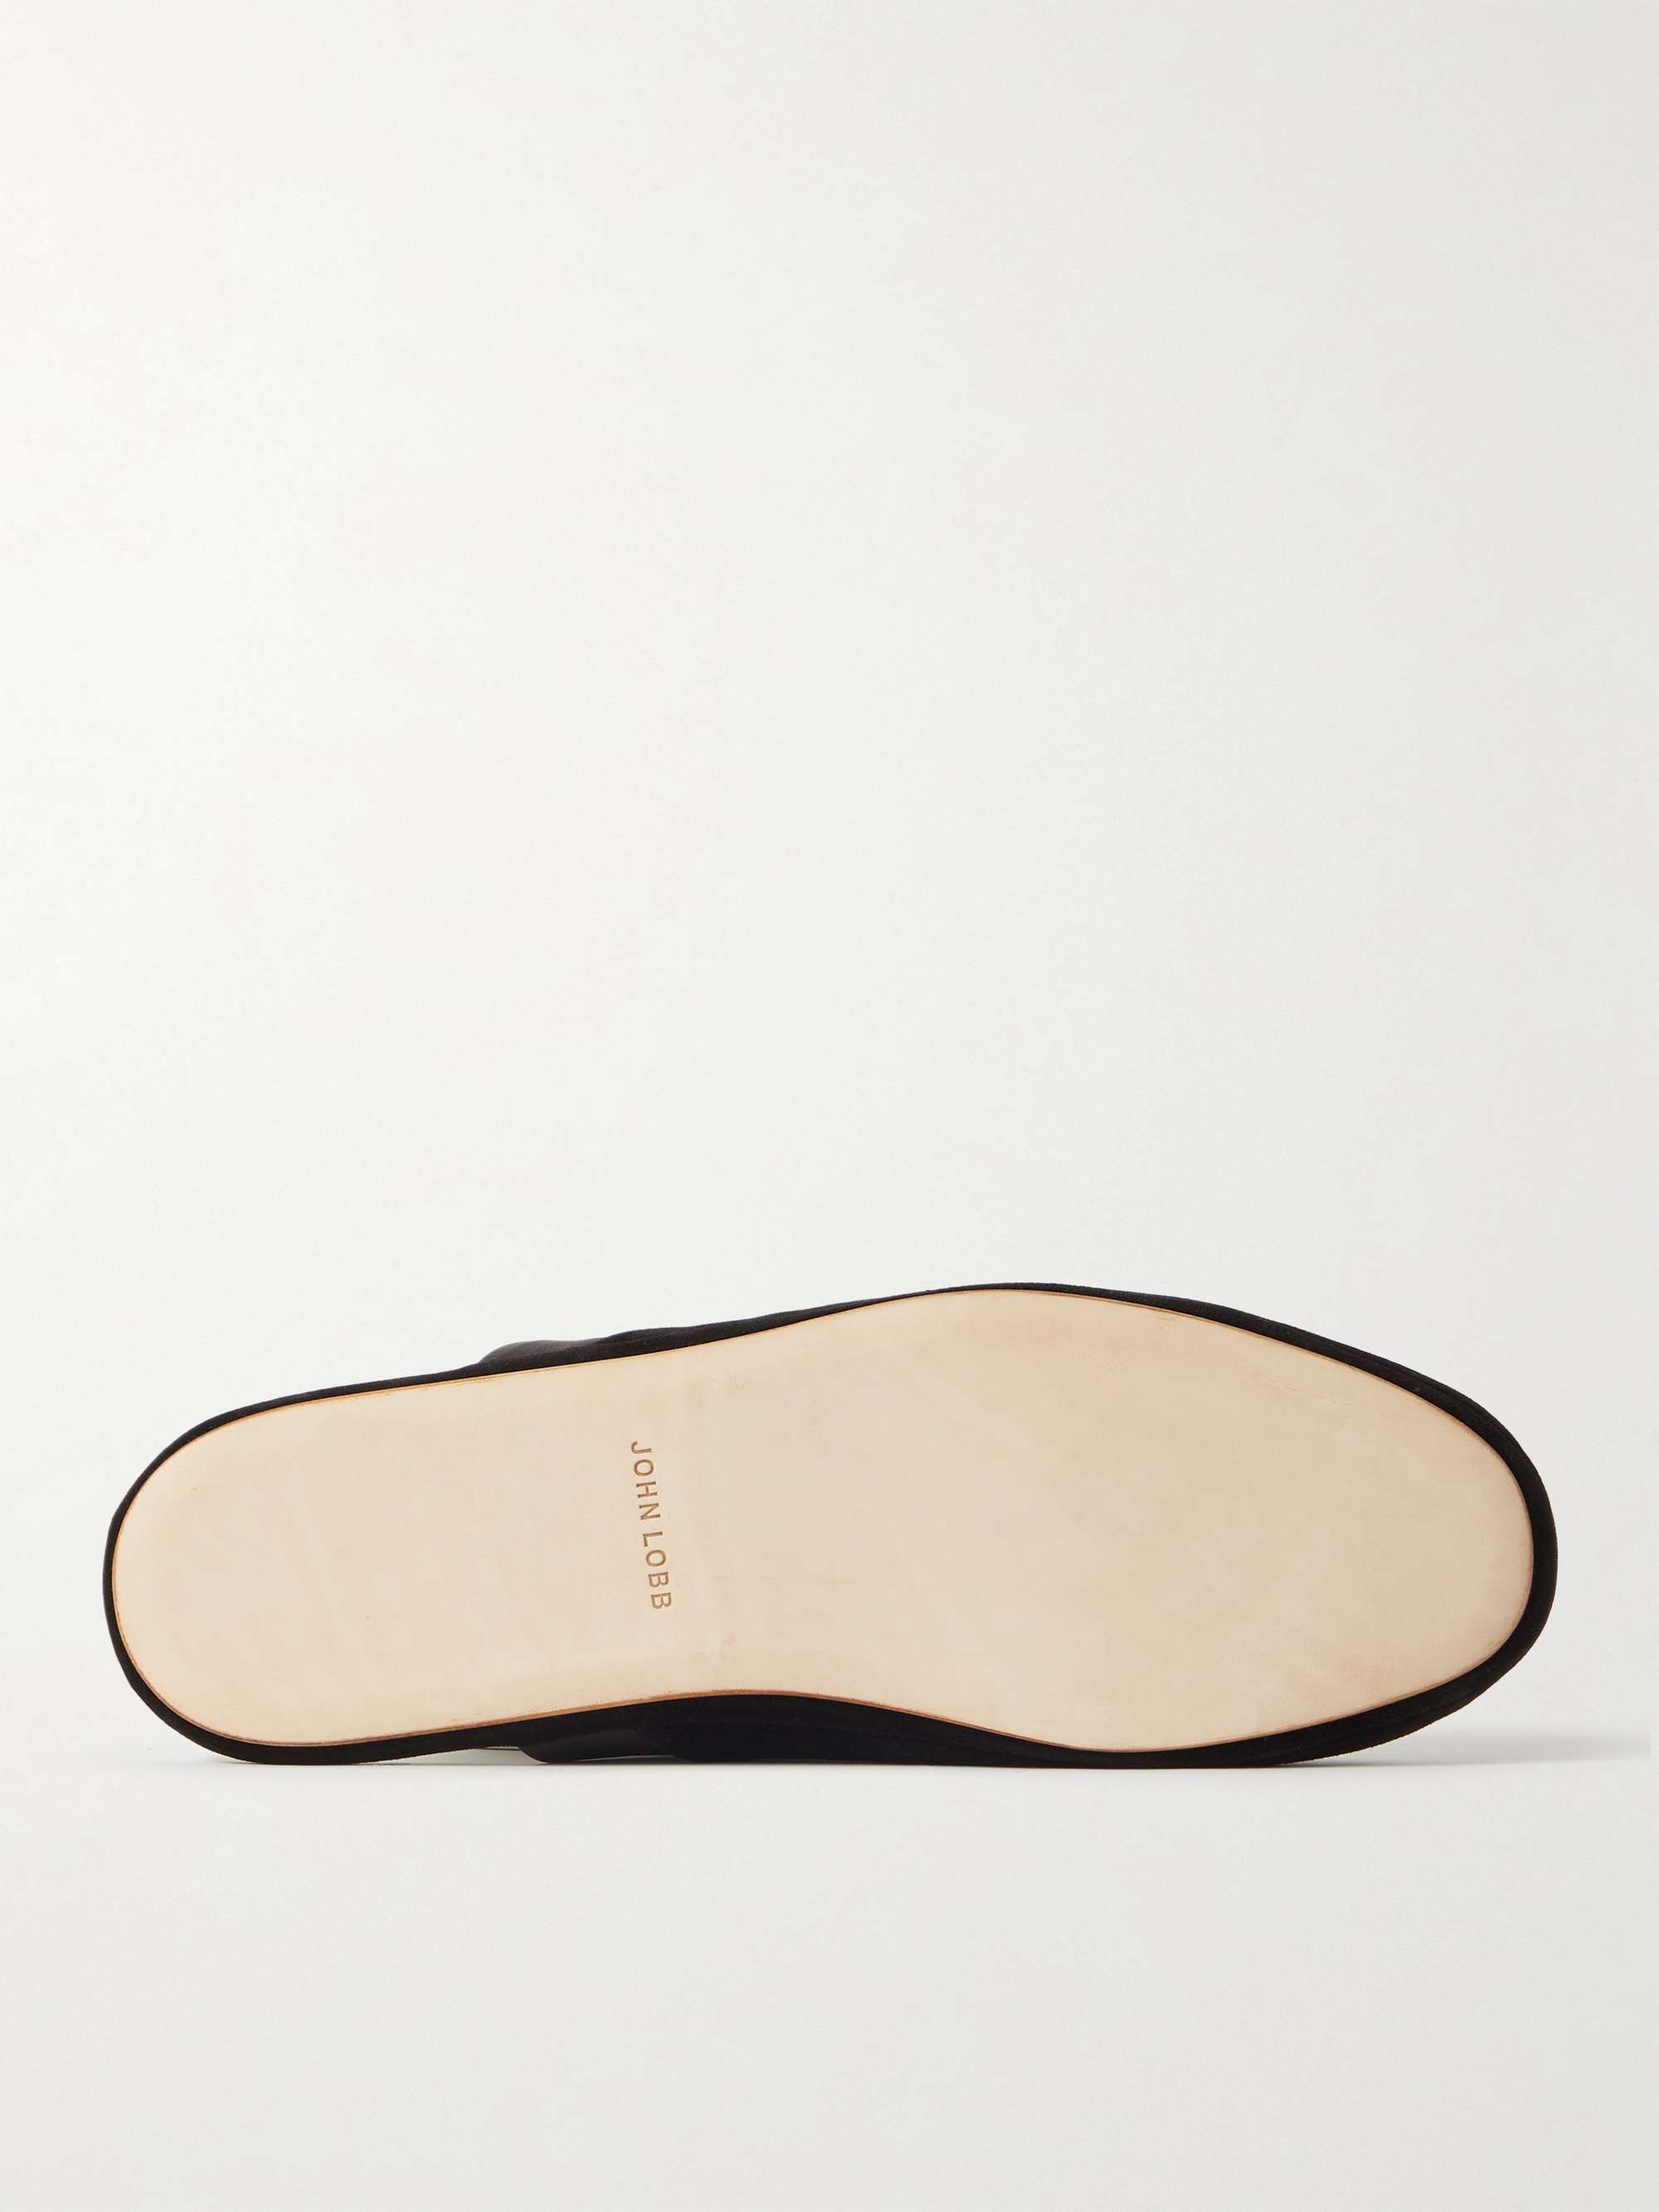 JOHN LOBB Knighton Leather-Trimmed Suede Slippers